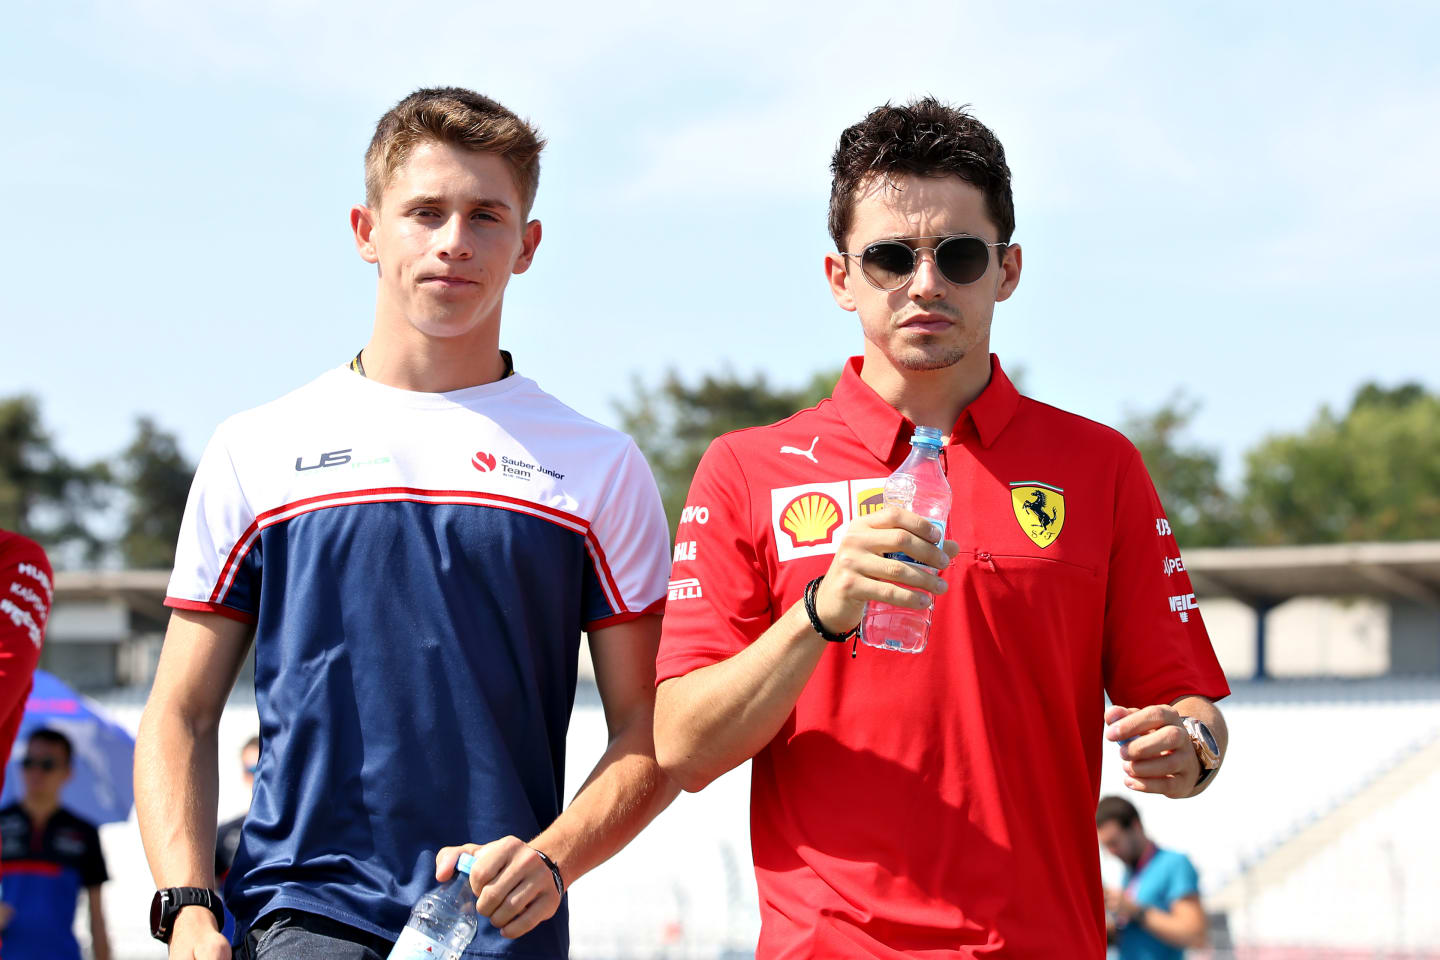 HOCKENHEIM, GERMANY - JULY 25: Charles Leclerc of Monaco and Ferrari walks the track with brother